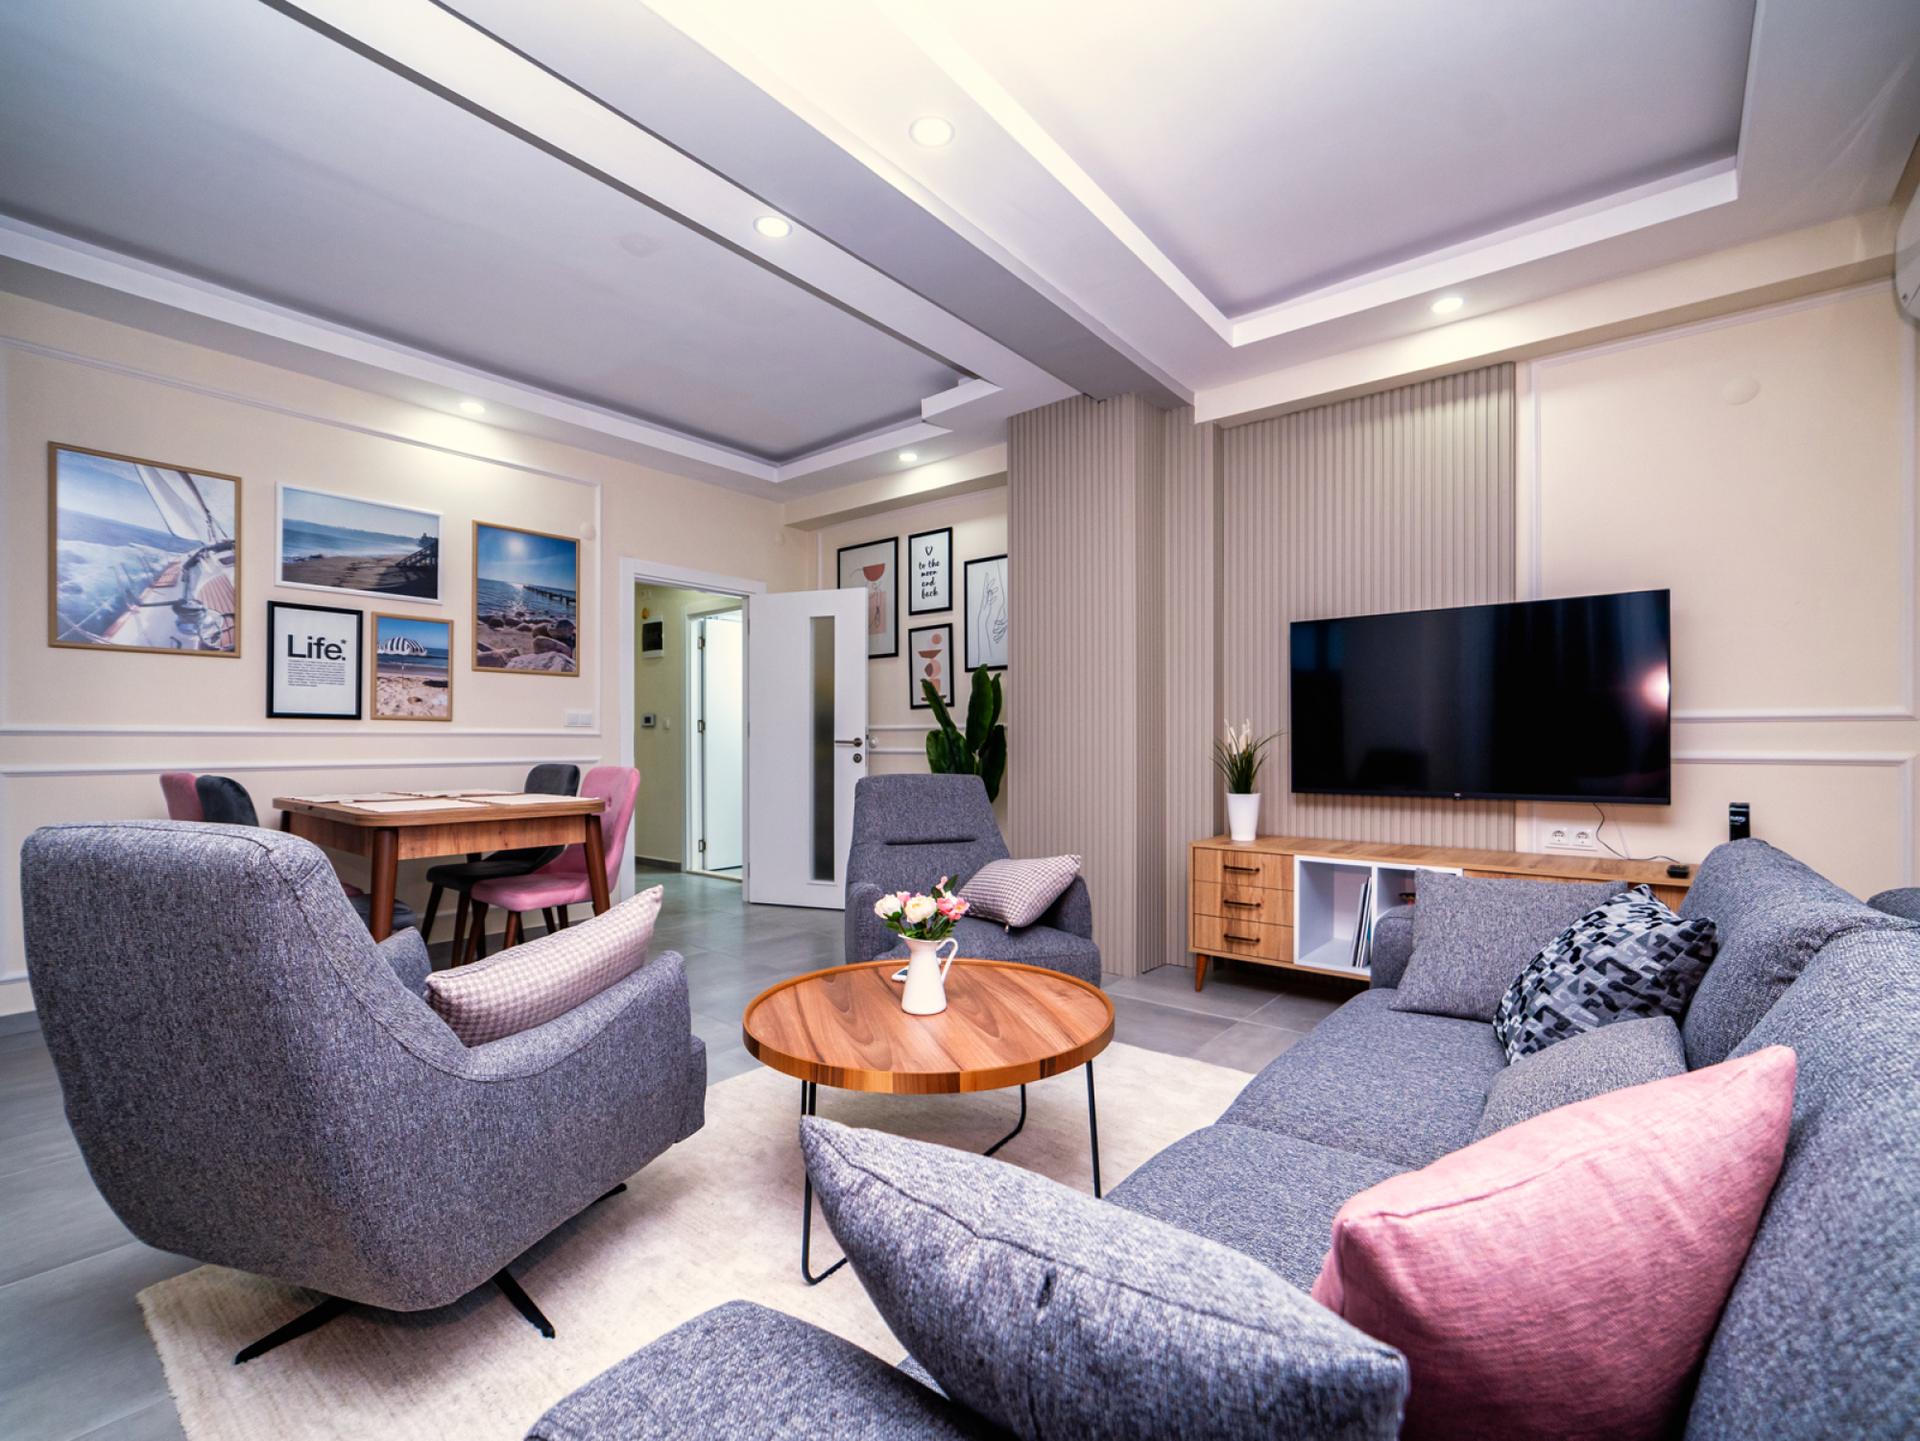 Experience the essence of coziness in our inviting and spacious living room.